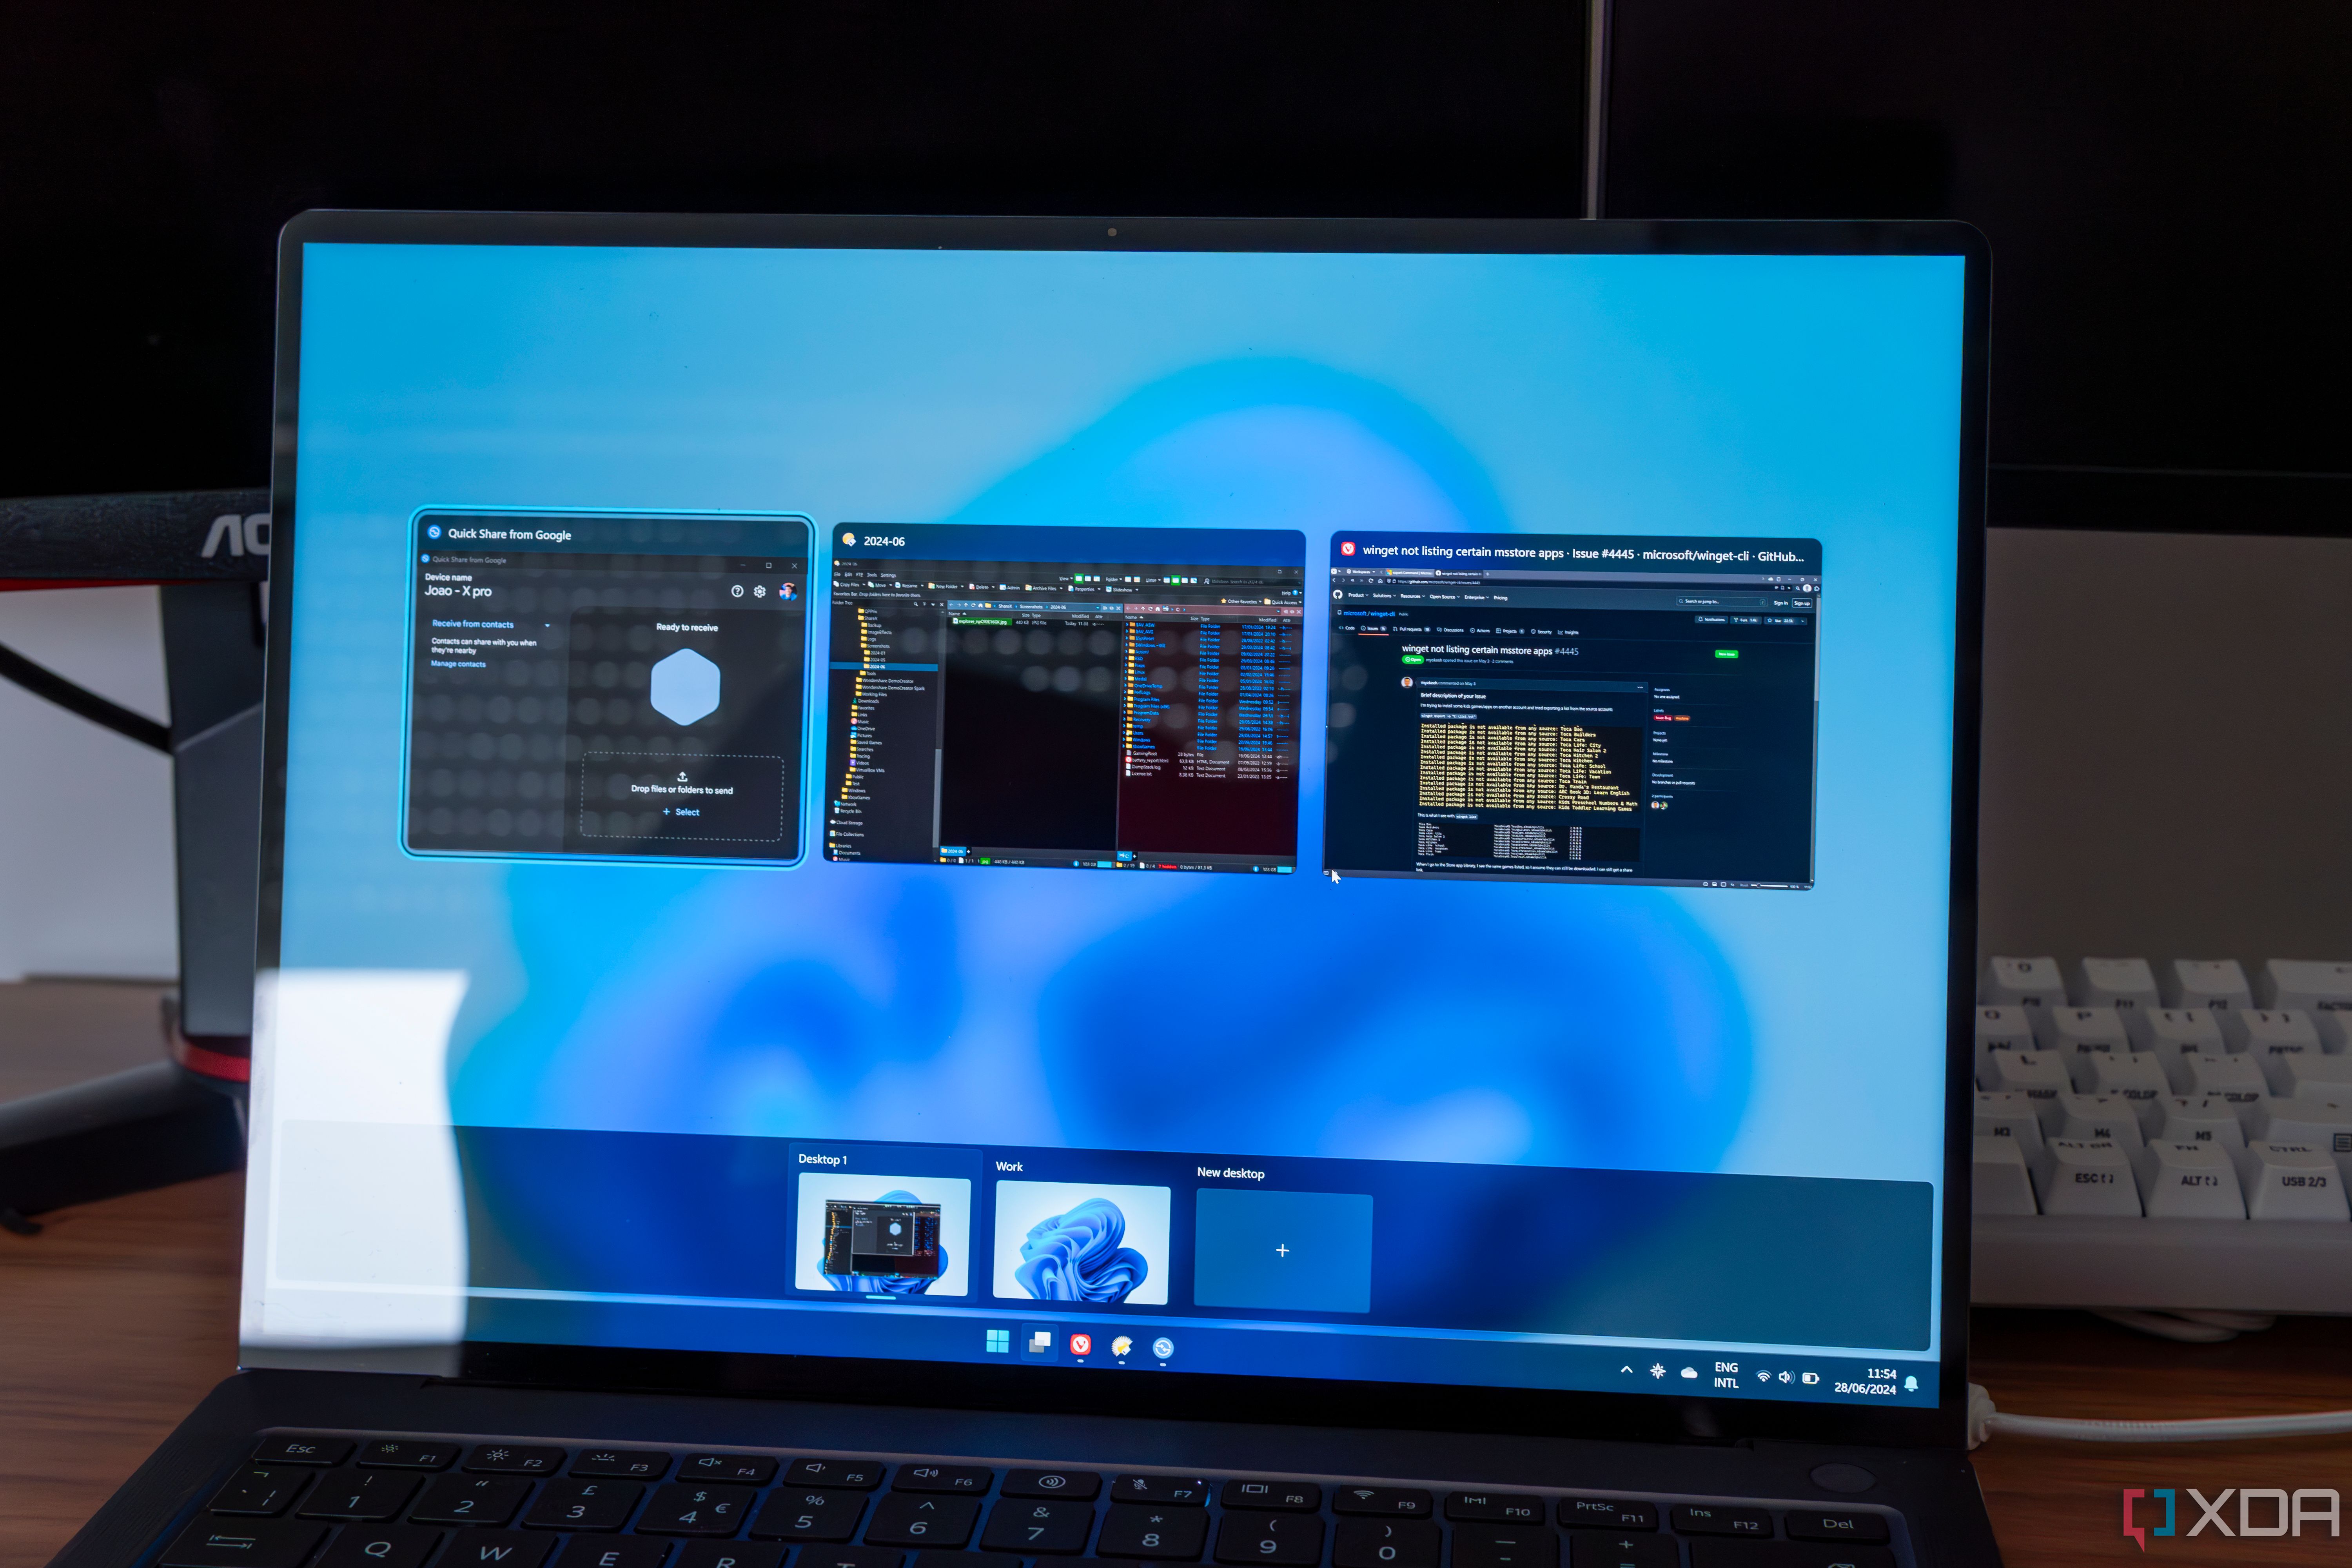 A Windows 11 laptop showing the Task View screen with two desktops at the bottom